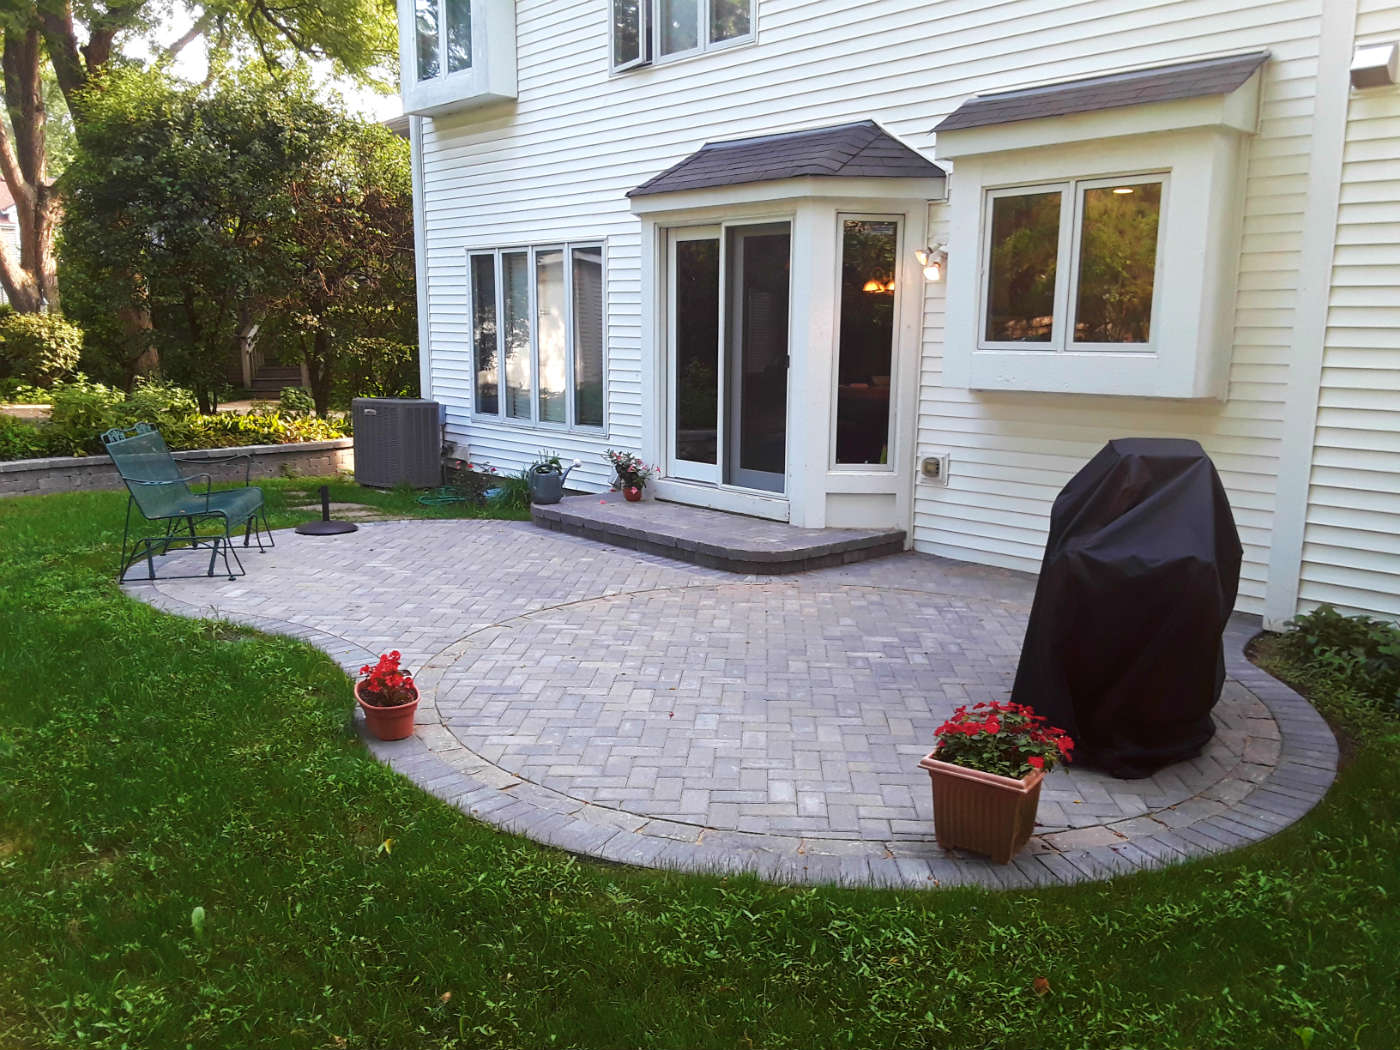 Belgard Paver Patio by Archadeck